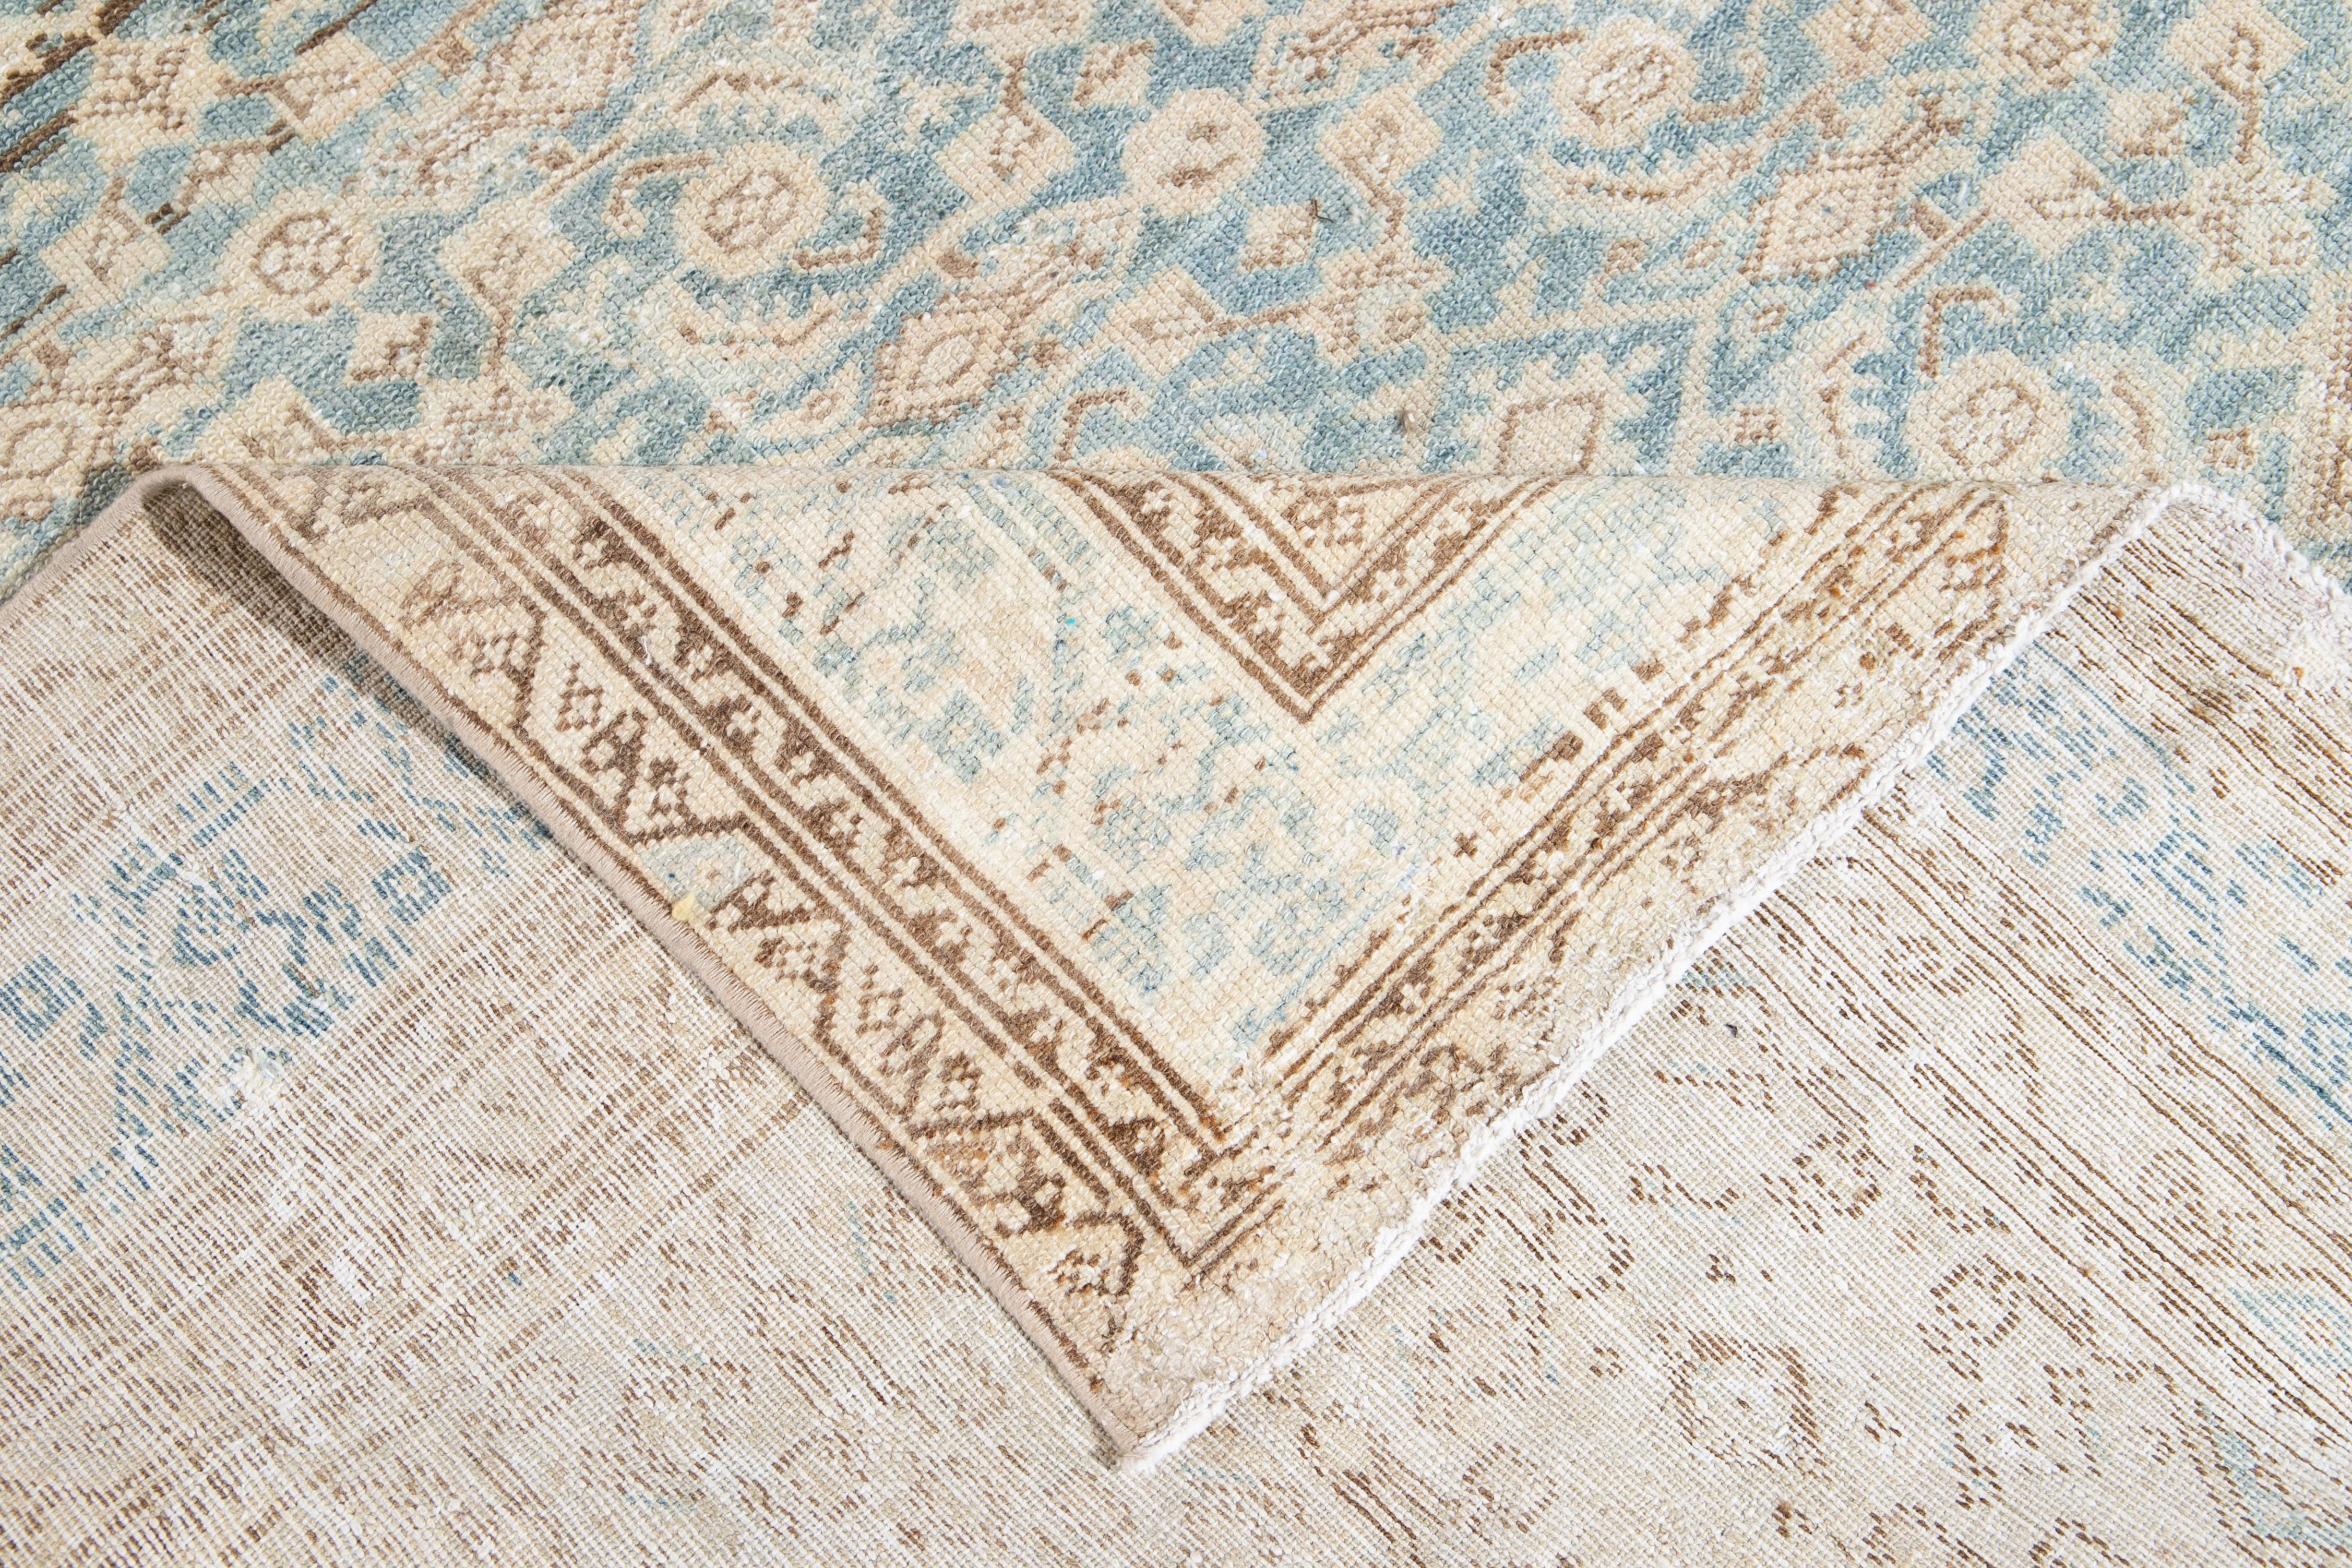 Beautiful vintage Persian Malayer hand knotted runner with a blue field, beige, and ivory accents in an all-over geometric motif design, with muted neutral tones wool rug!

This rug measures: 7'5